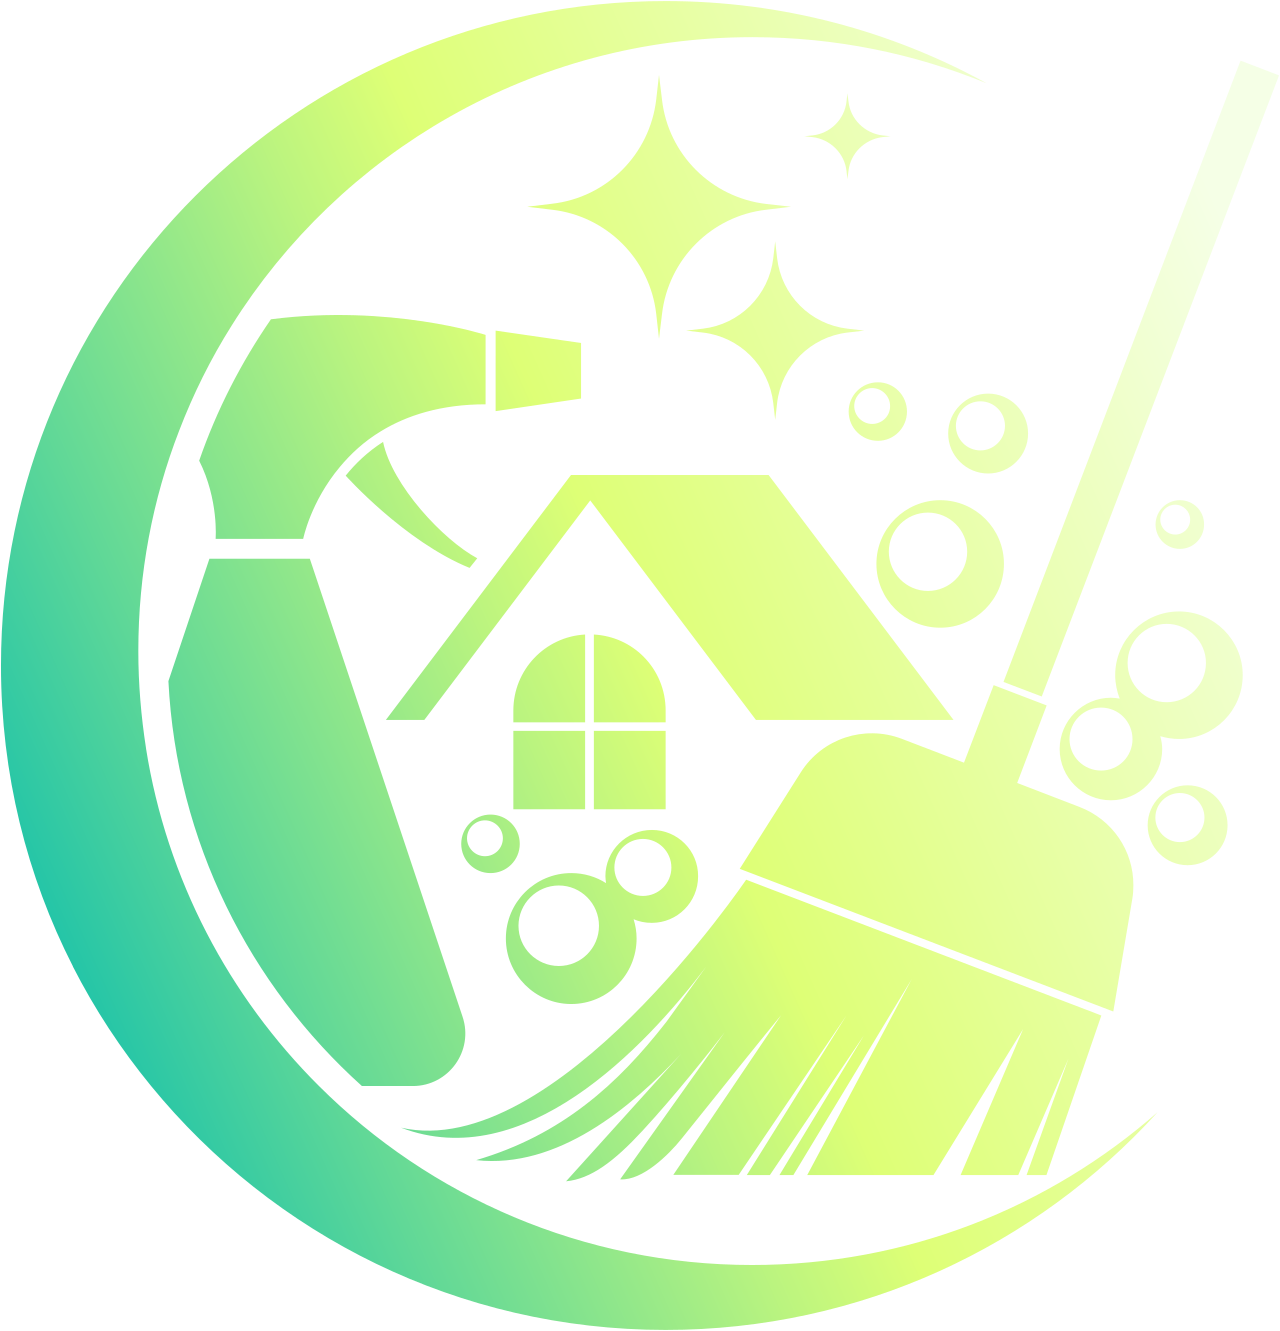 Old school cleaning 's logo